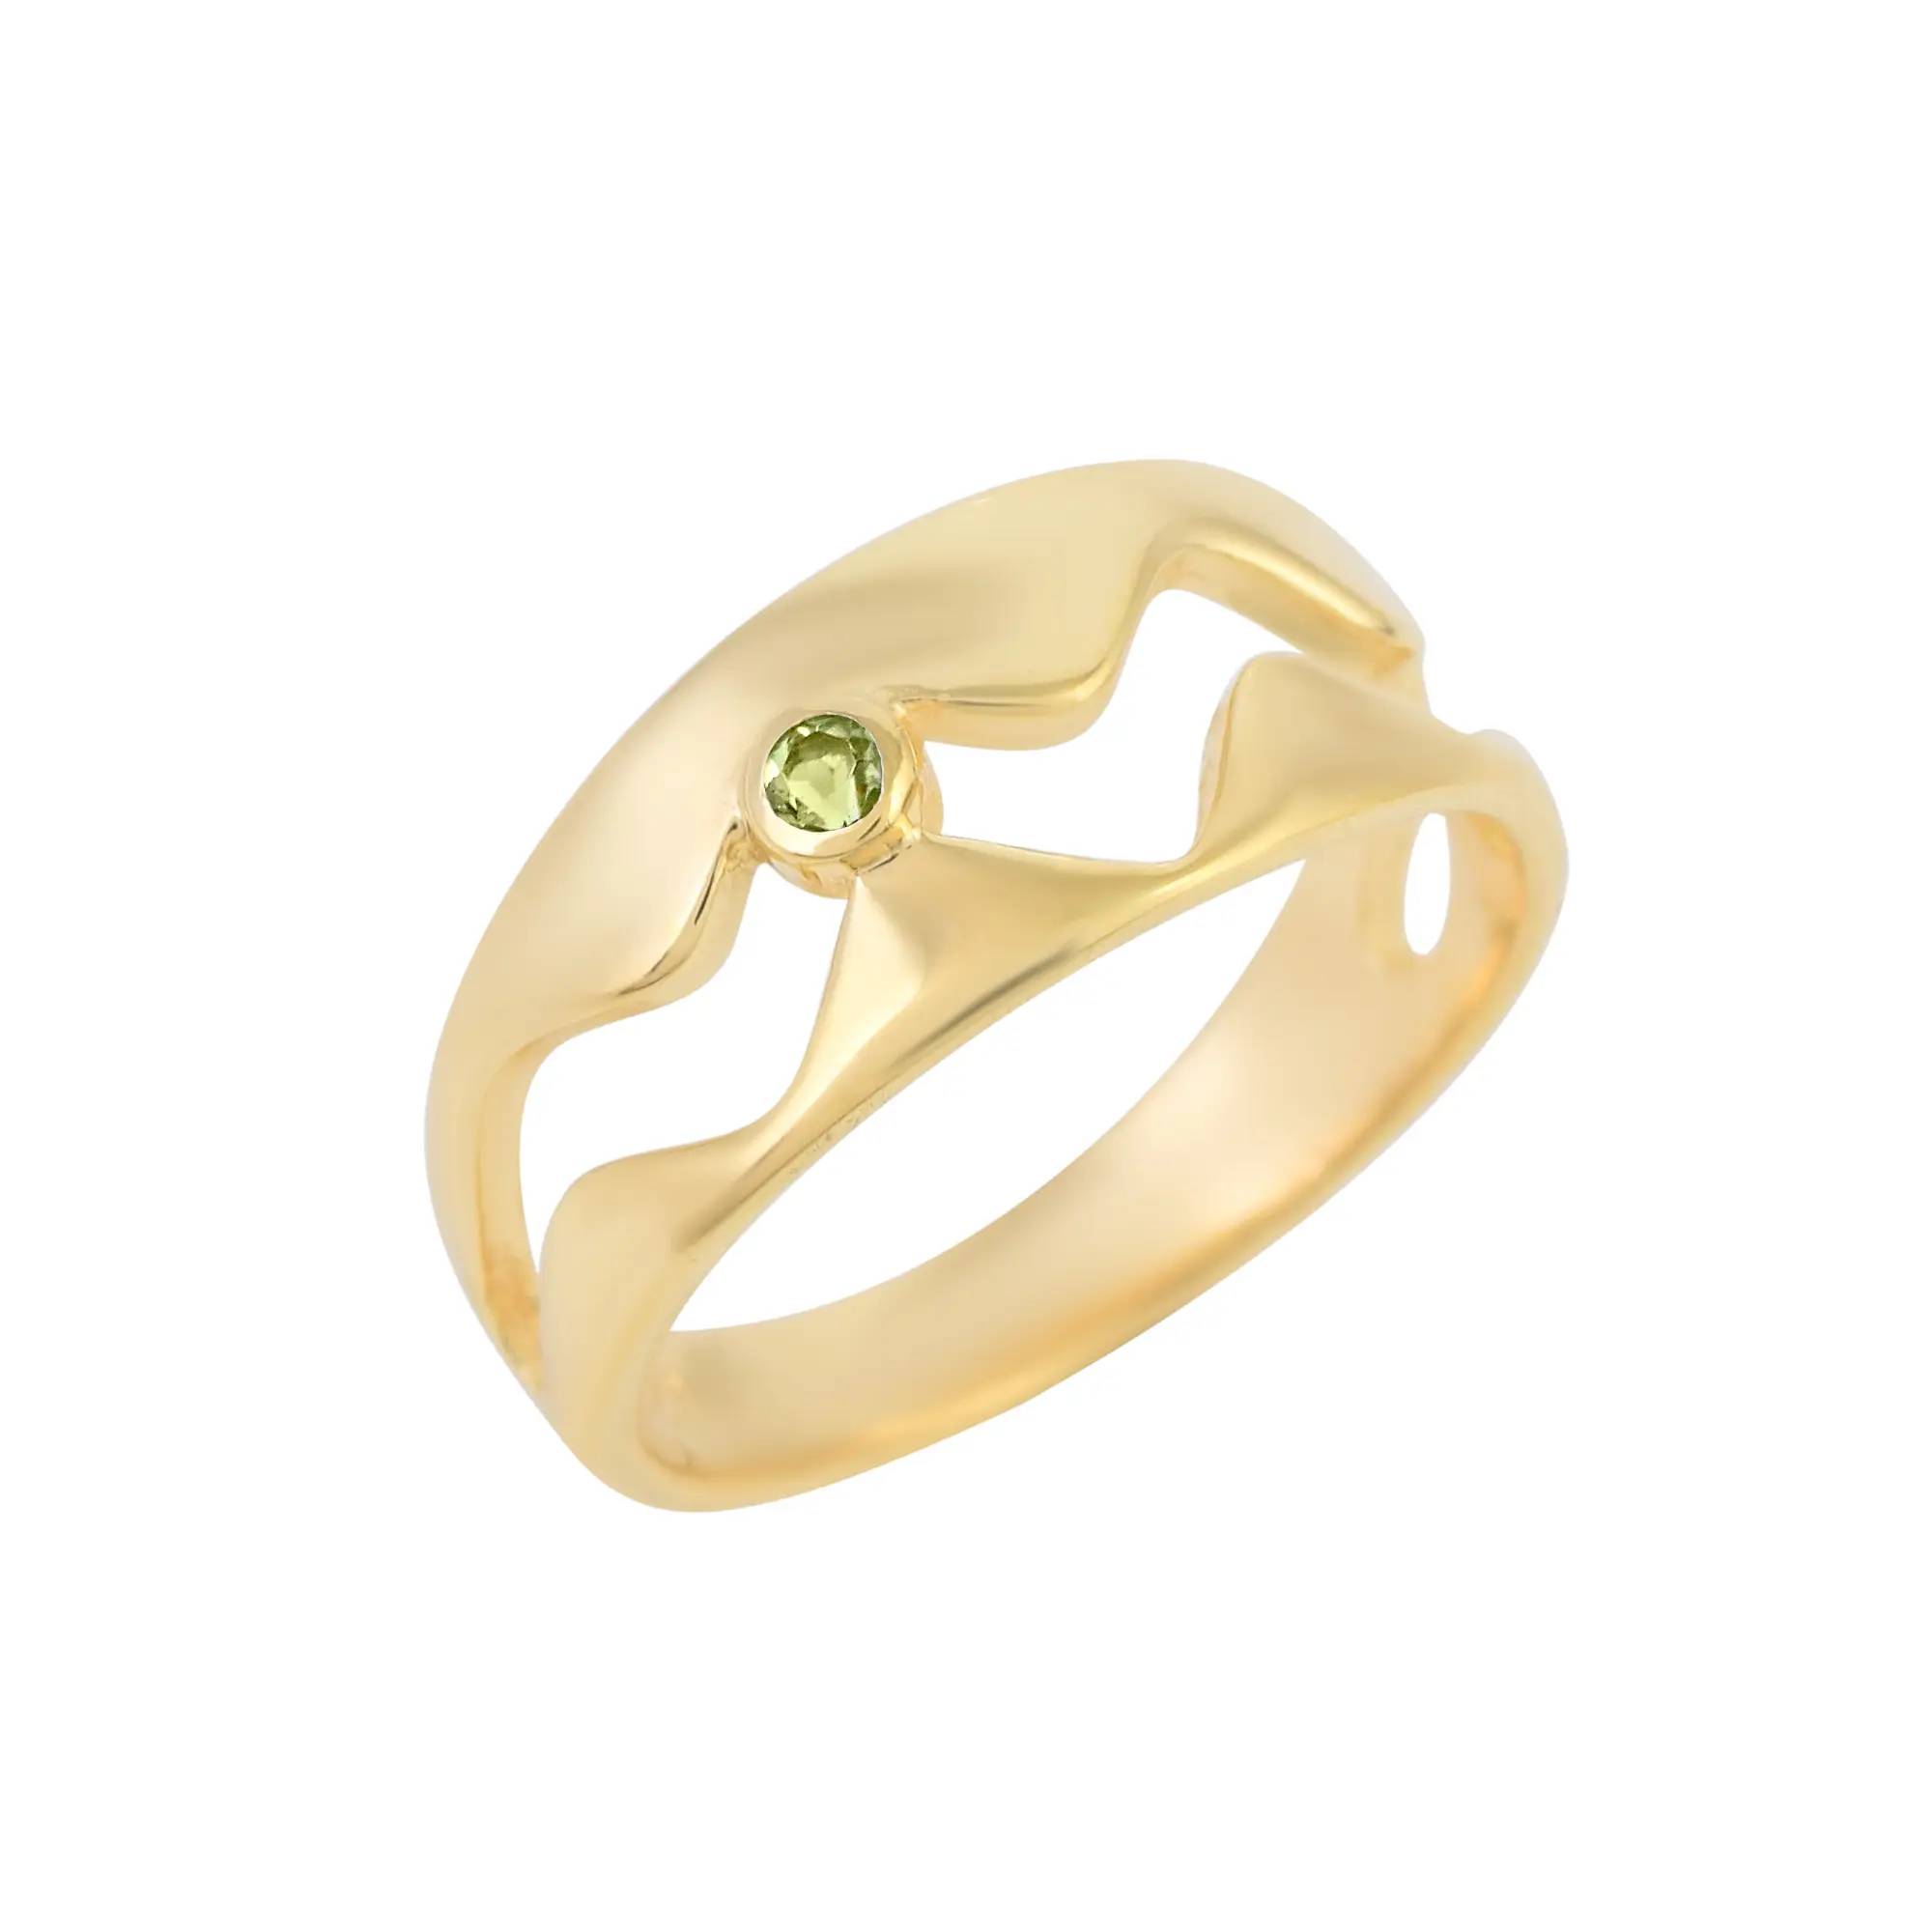 Peridot Gemstone Real S925 Sterling Silver Gold Plated Band Cheap Price Ring Jewelry For Events and Functions